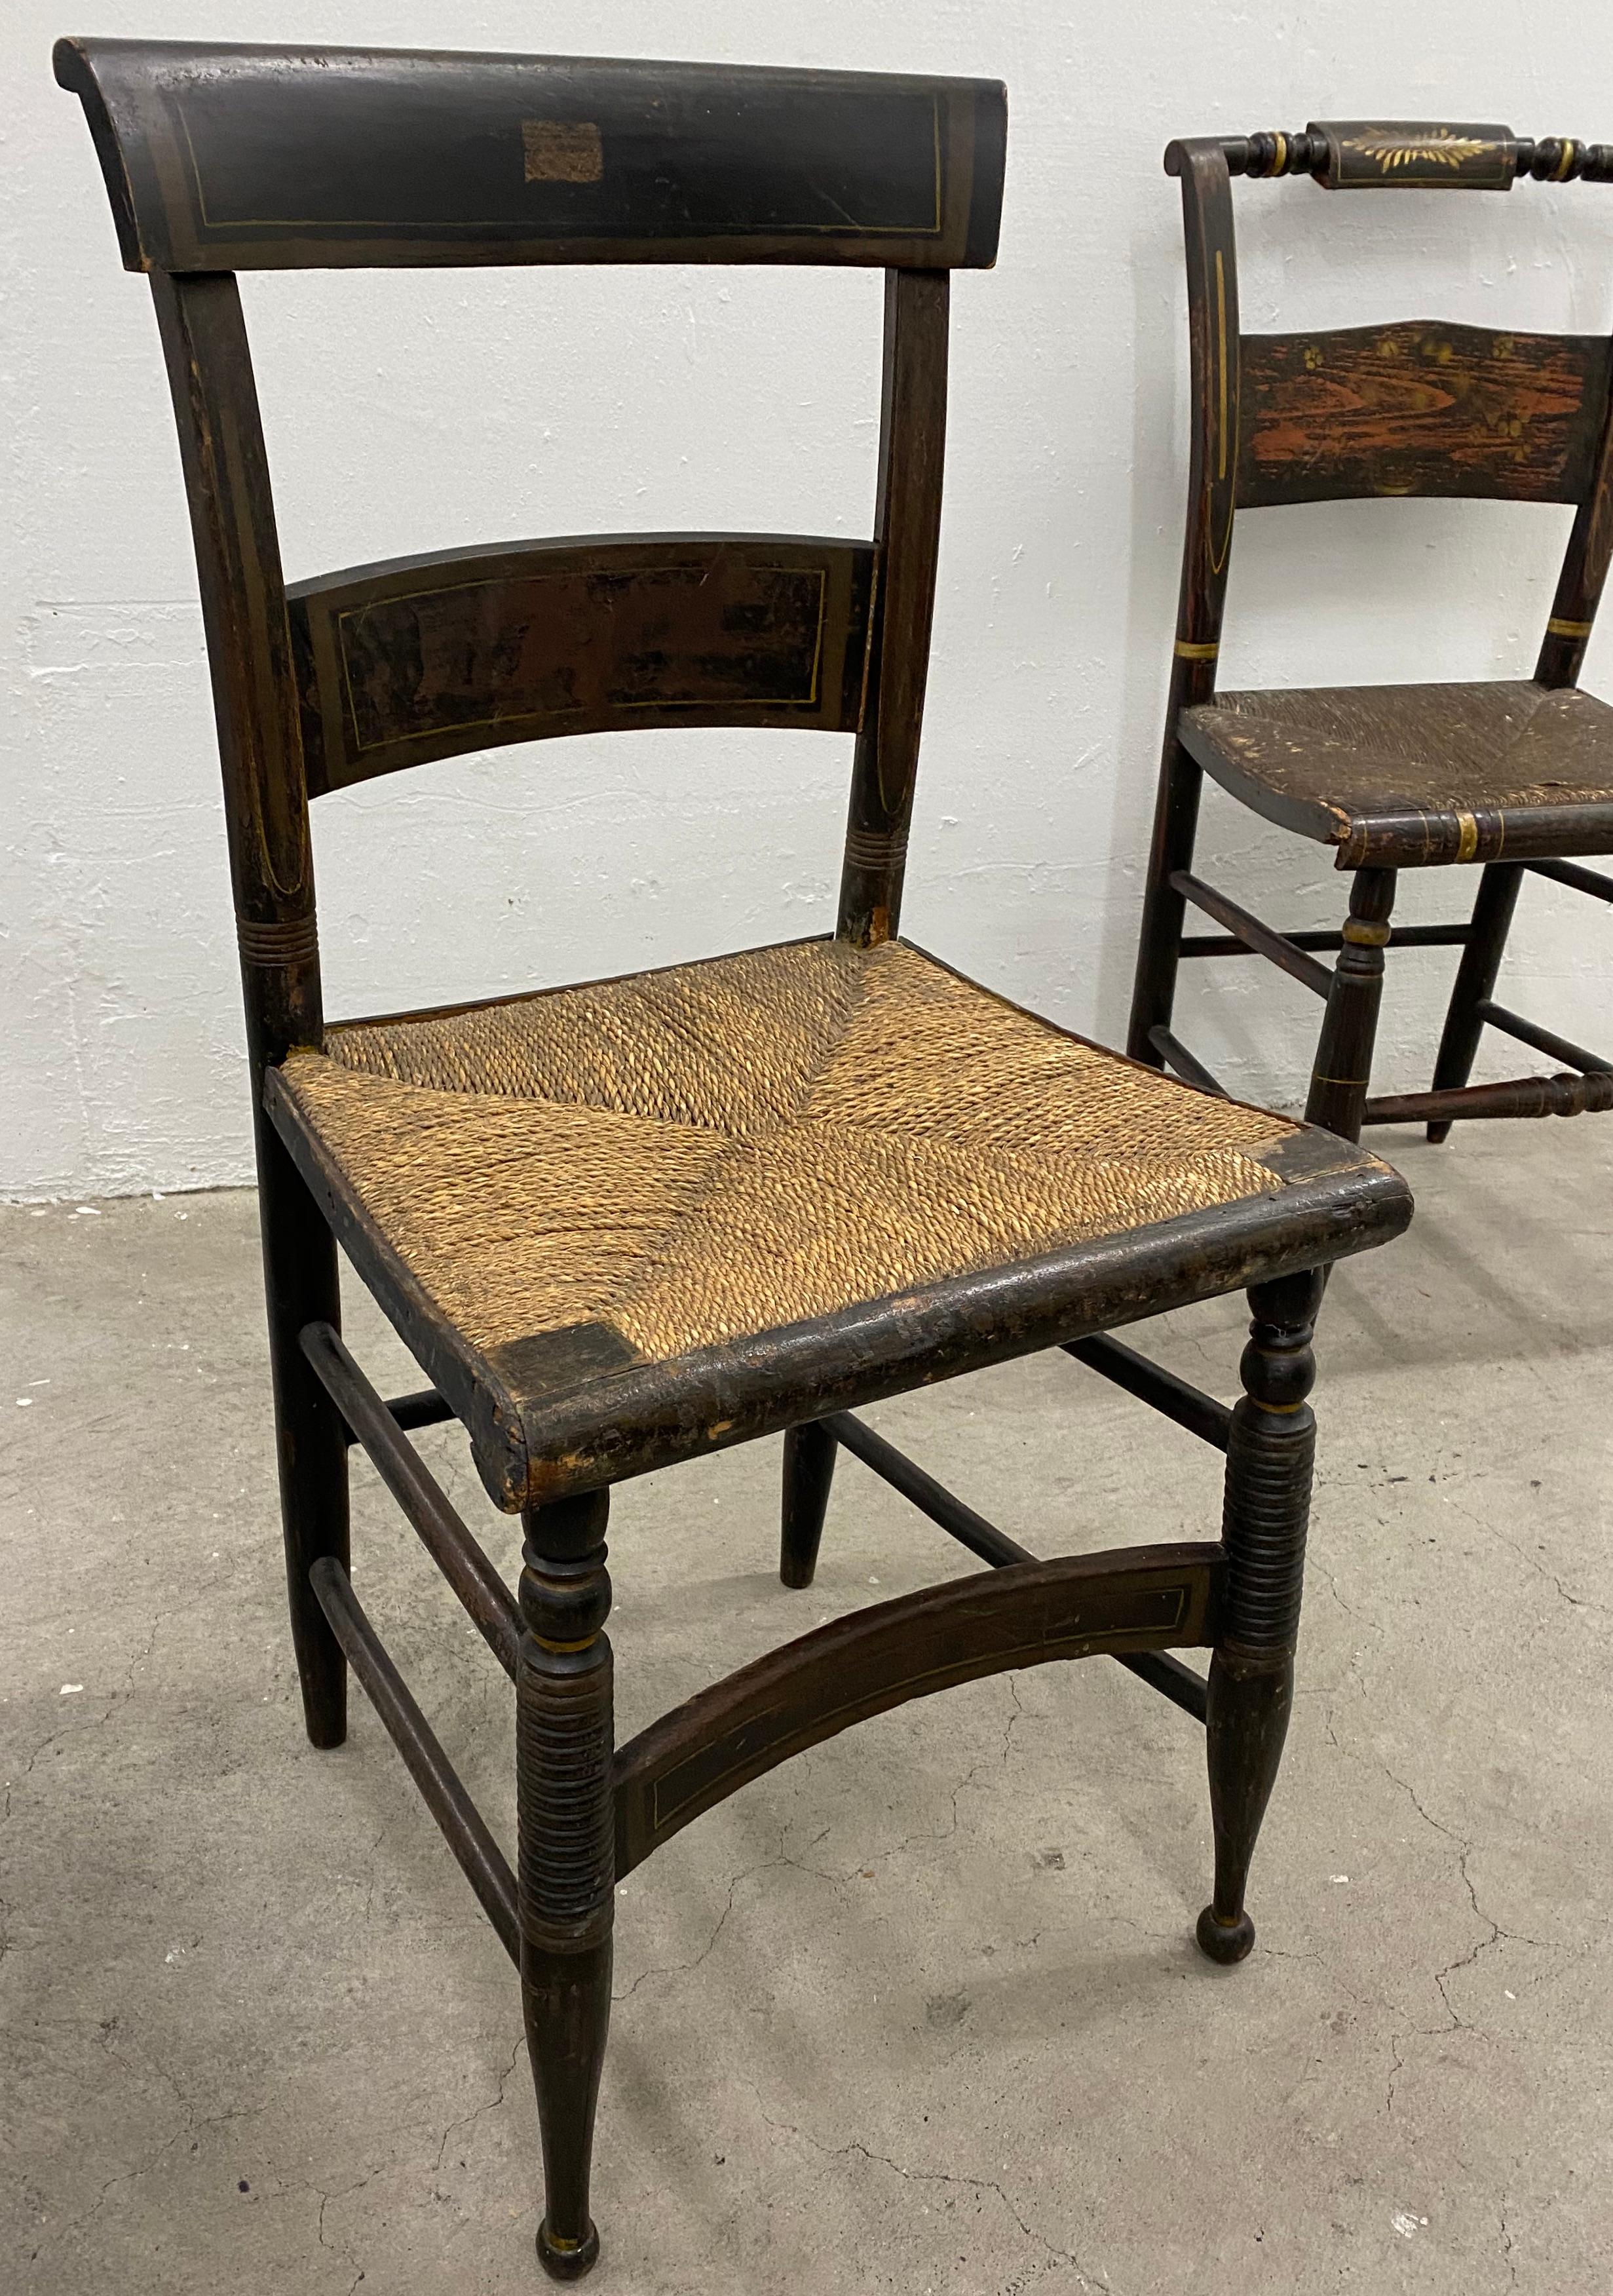 Lot of Six Mid-19th Century Mis-Matched American Hitchcock Side Chairs 1